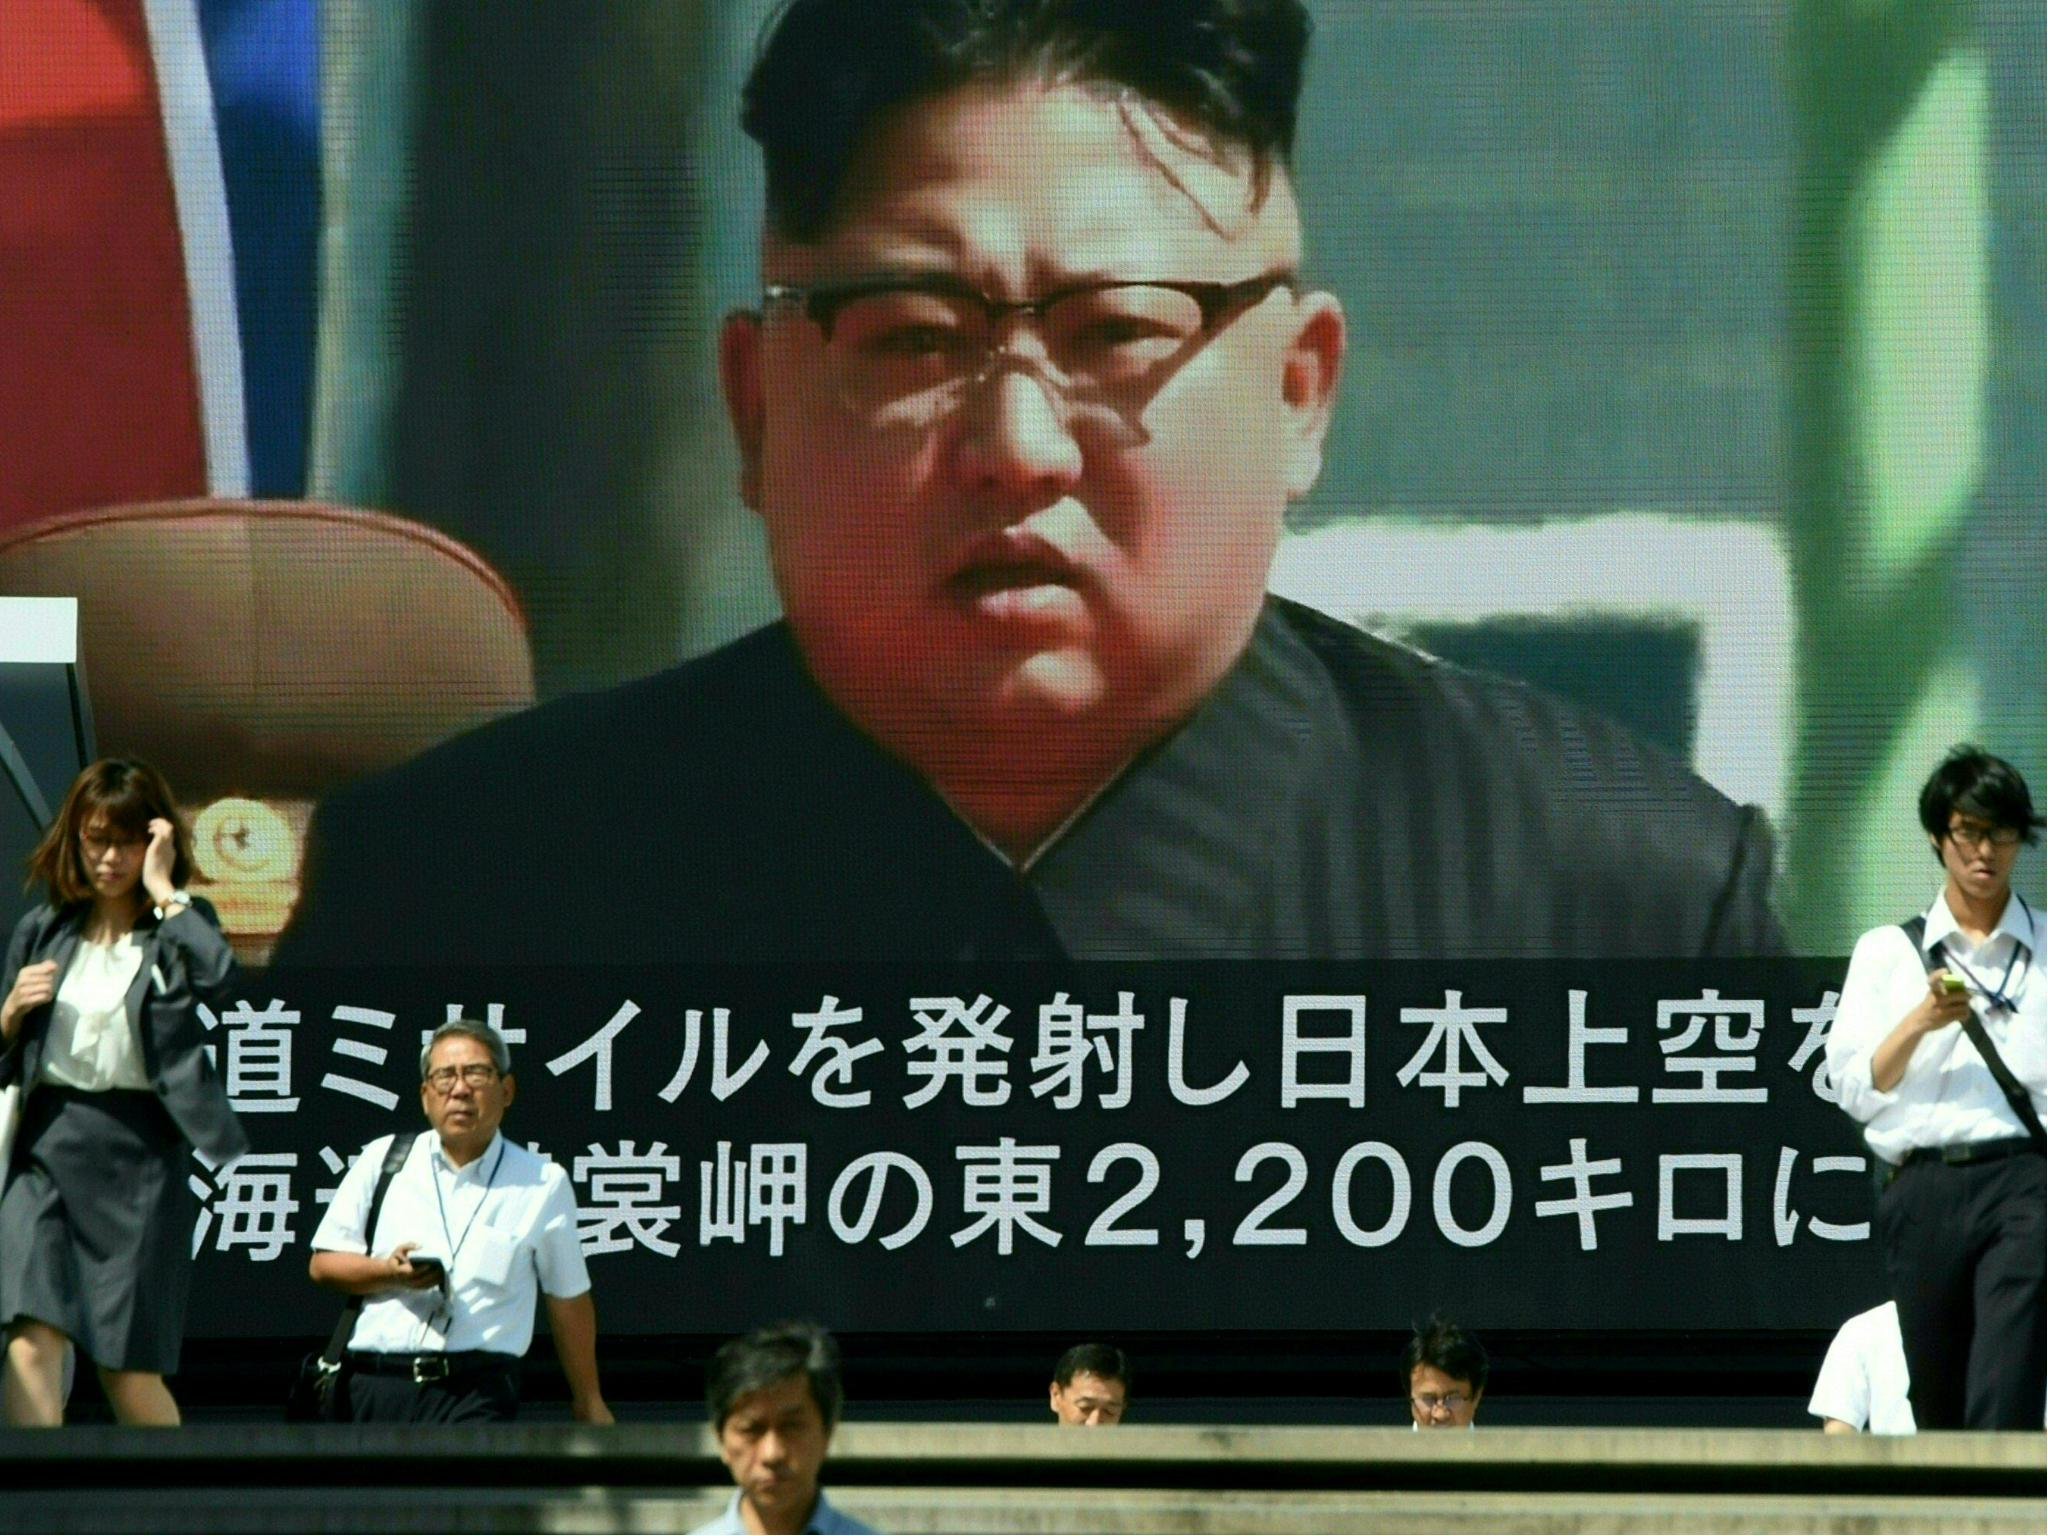 Pedestrians walk in front of a large video screen in Tokyo broadcasting a news report showing North Korean leader Kim Jong-Un (File photo)